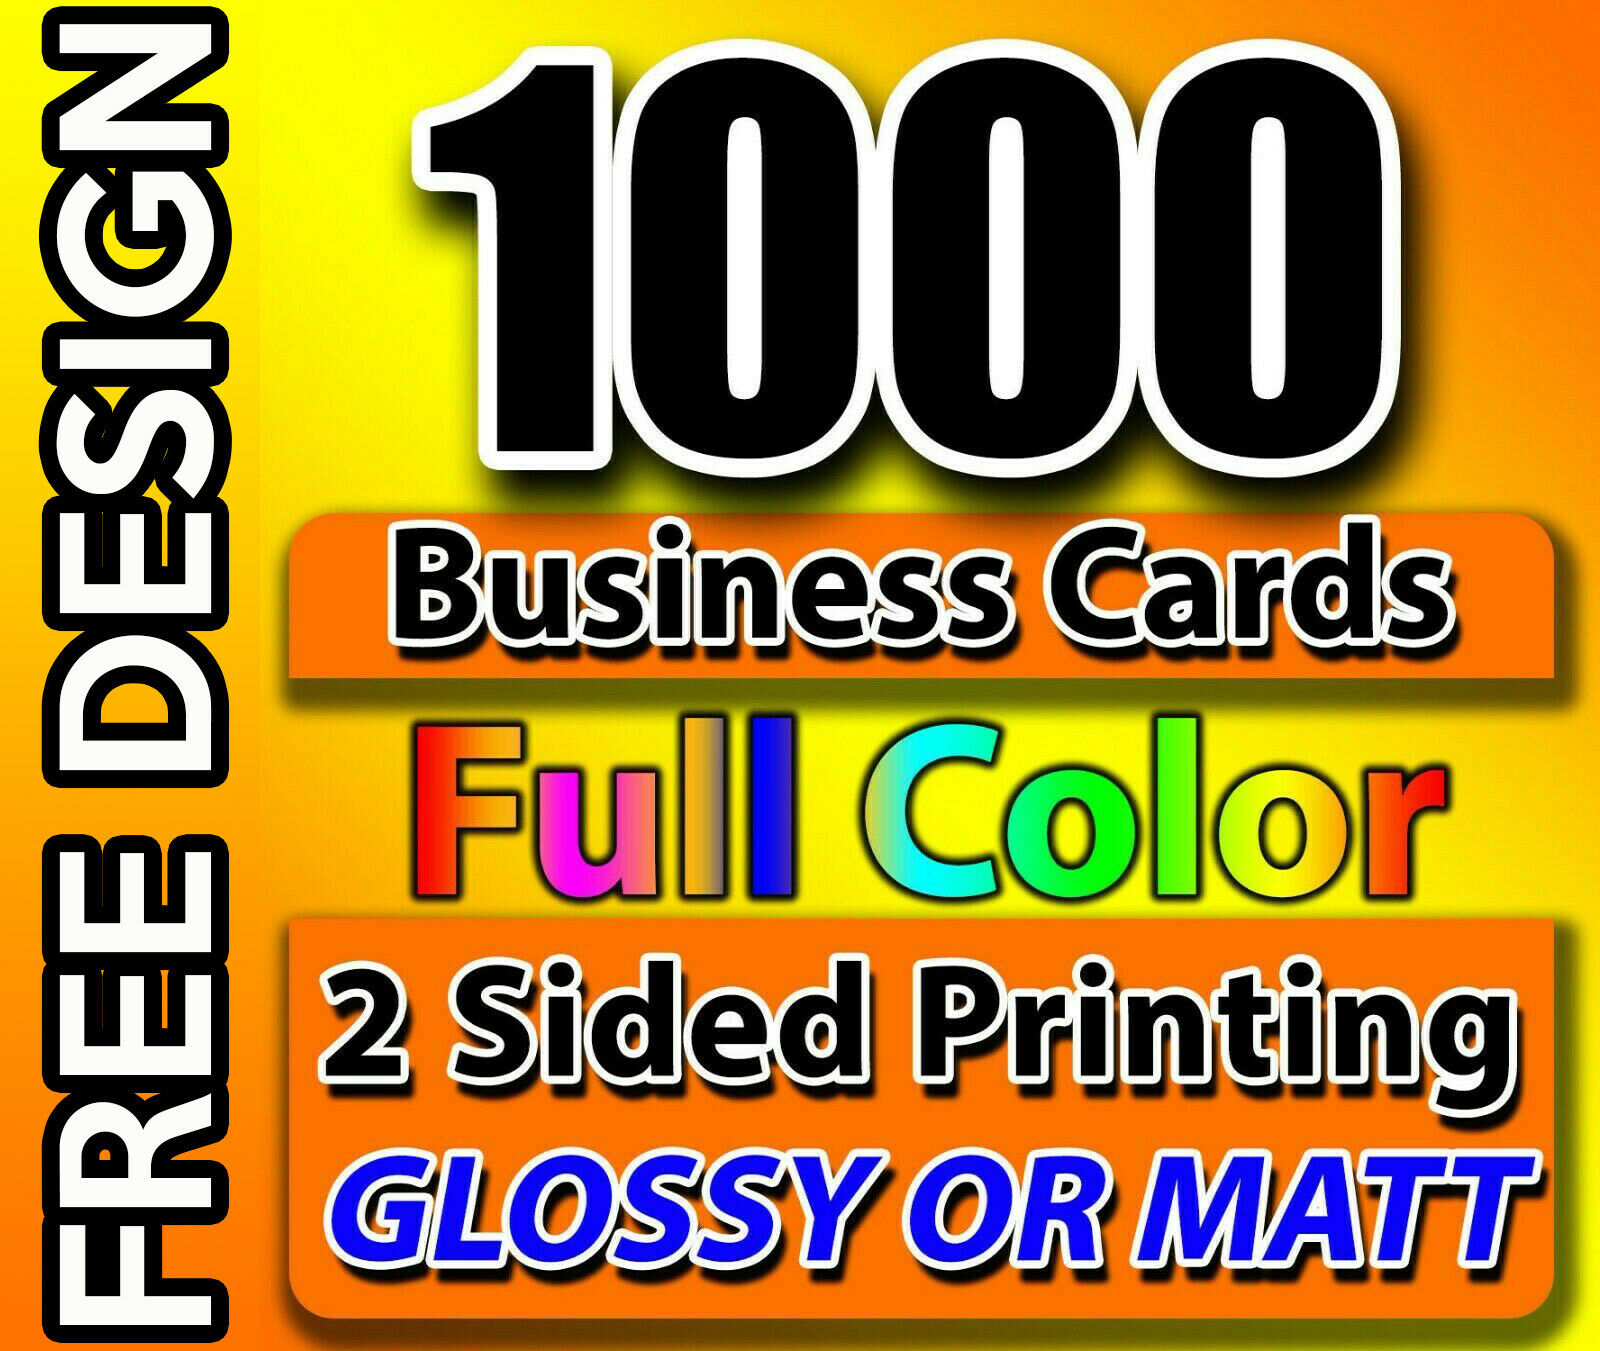 Business Cards / Free Design & Shipping / Qty: 1000 / Full Color / 2 Side Print